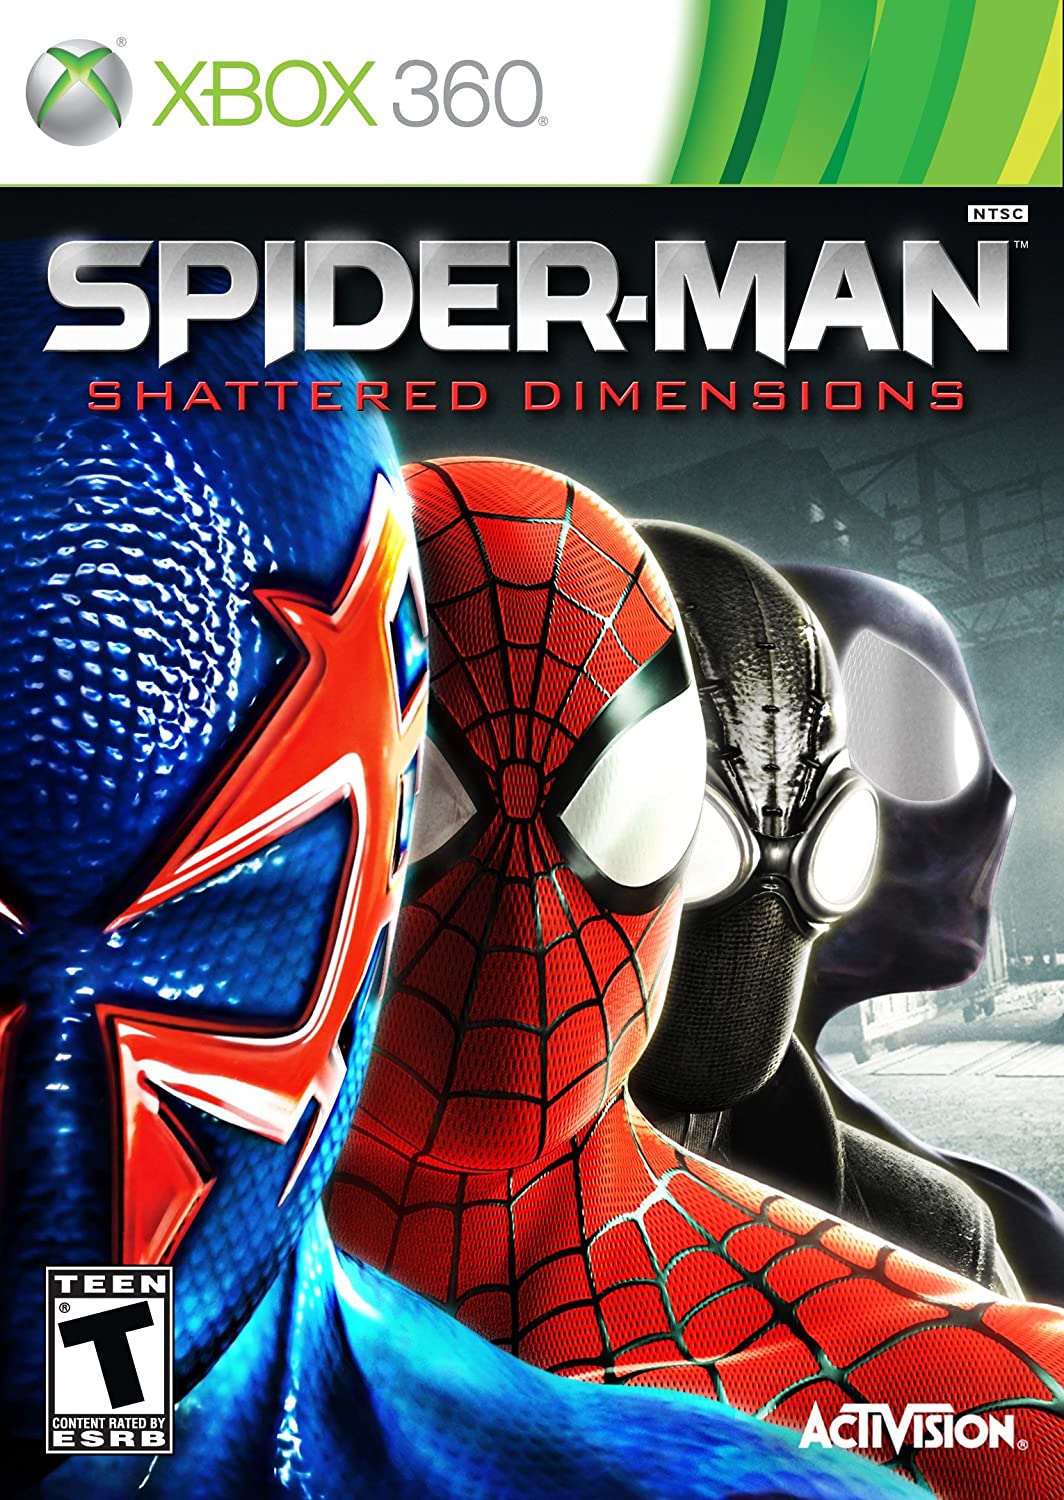 Spider-Man: Shattered Dimensions player count stats